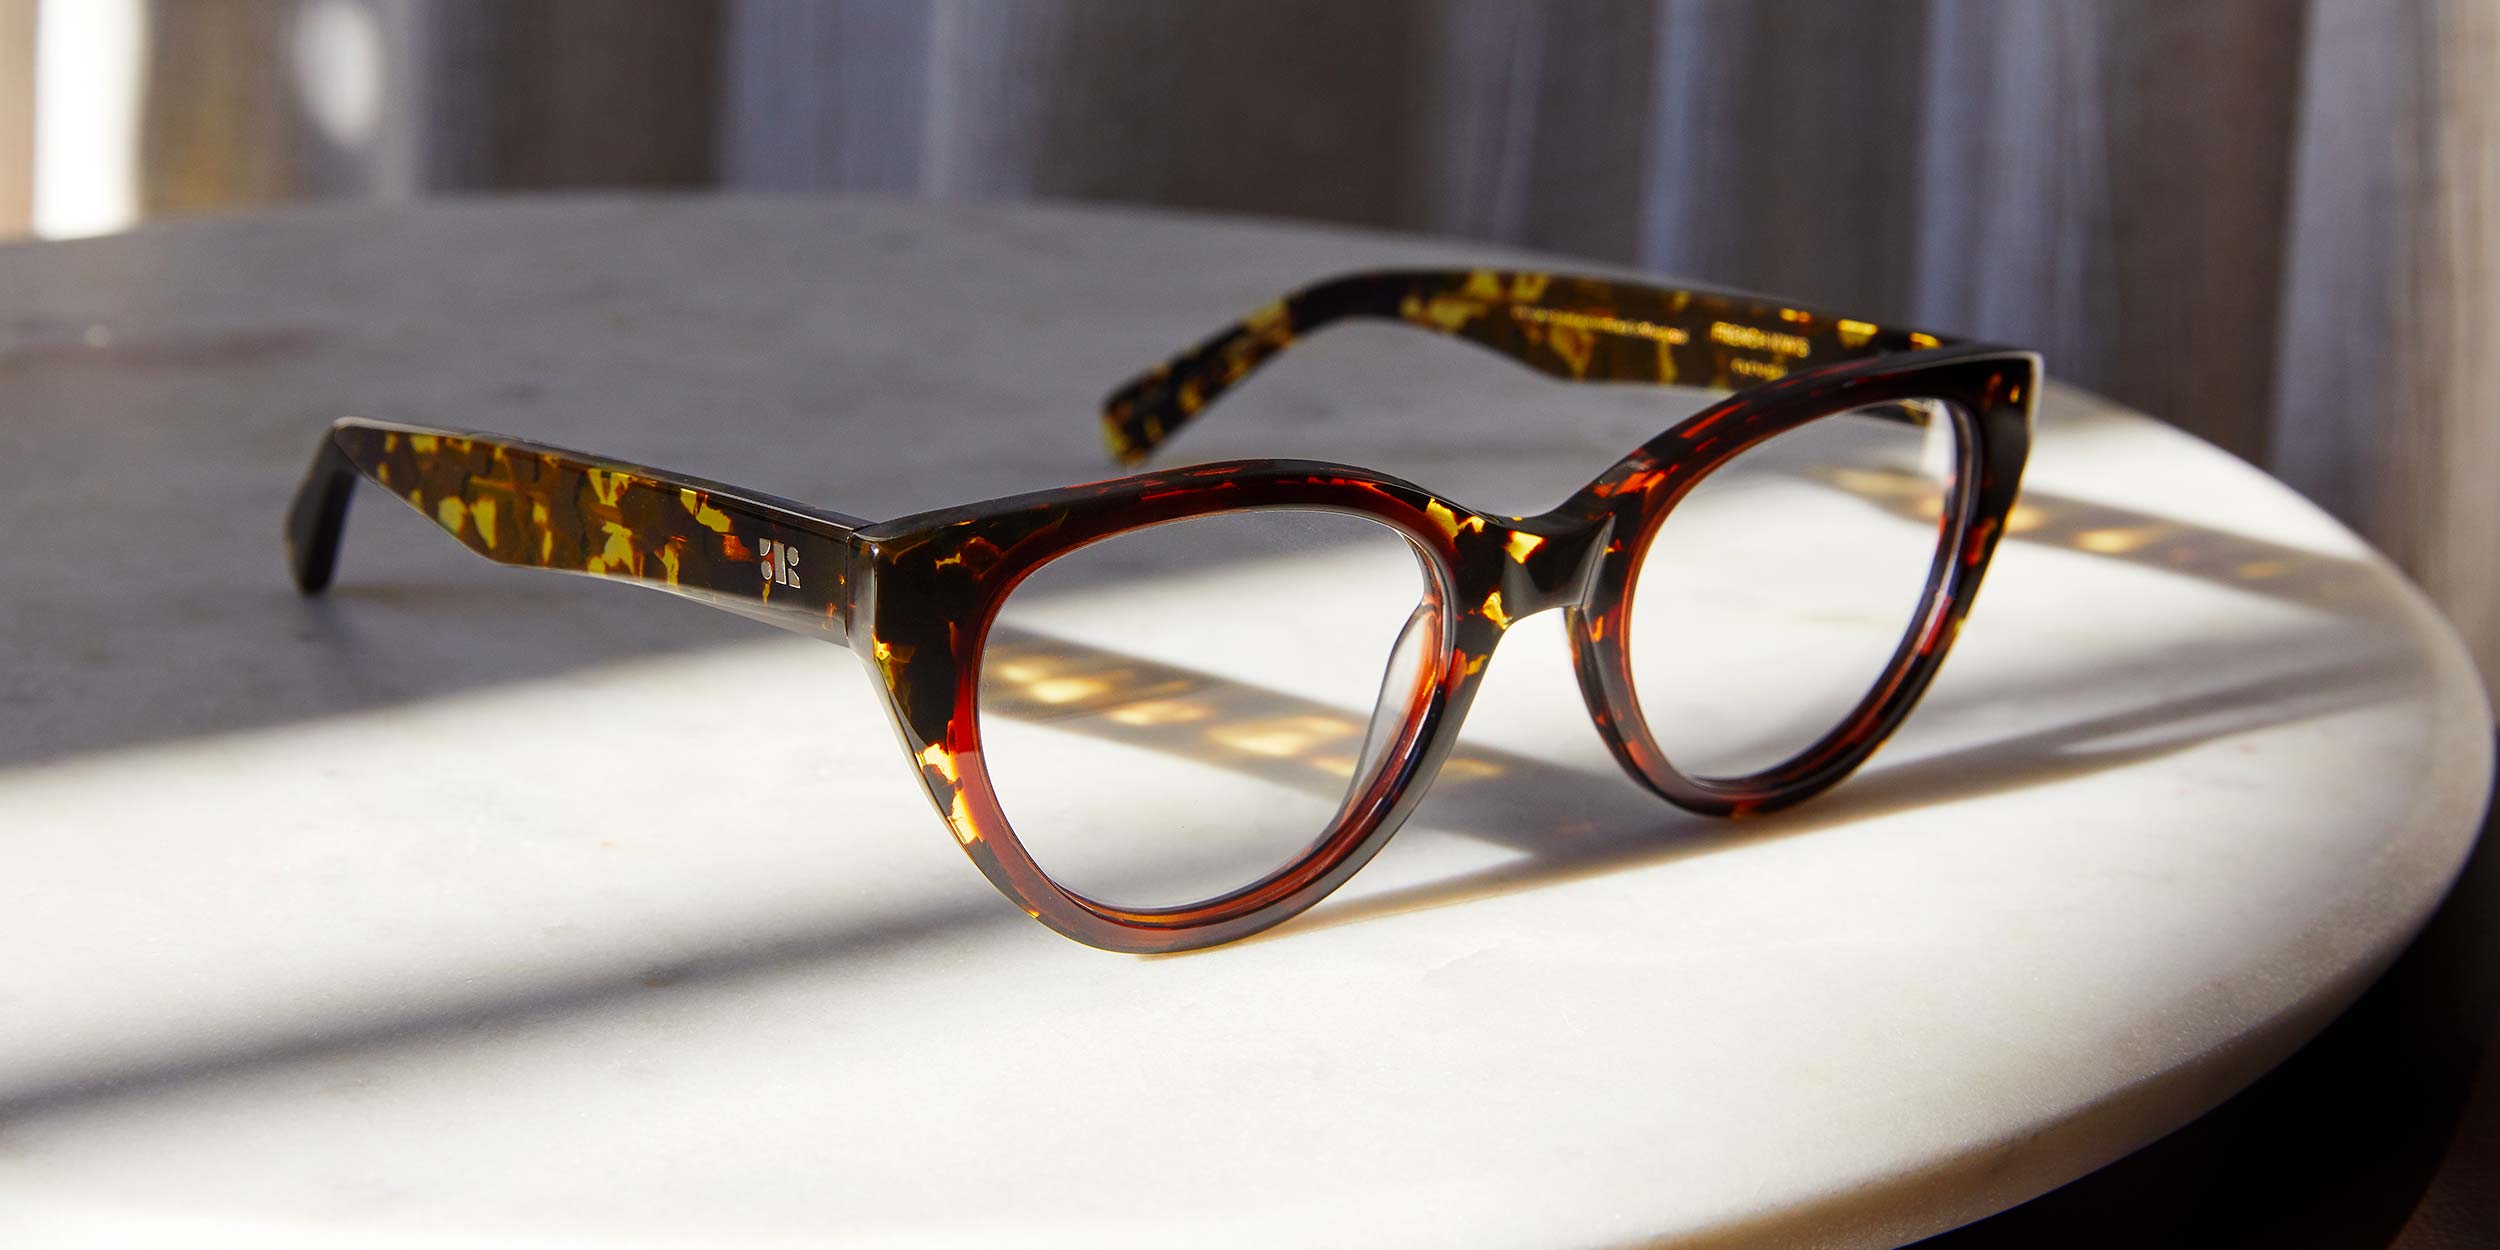 Photo Details of Colette Rosé & Tortoise Reading Glasses in a room